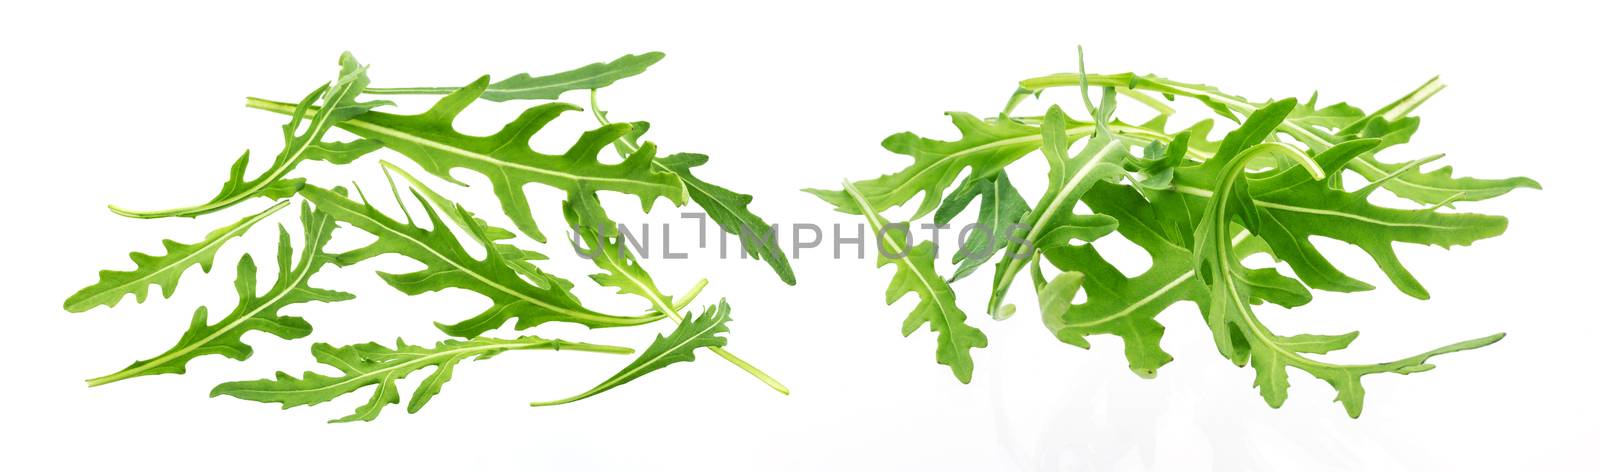 Heap of fresh rucola leaves isolated on white background with clipping path by xamtiw